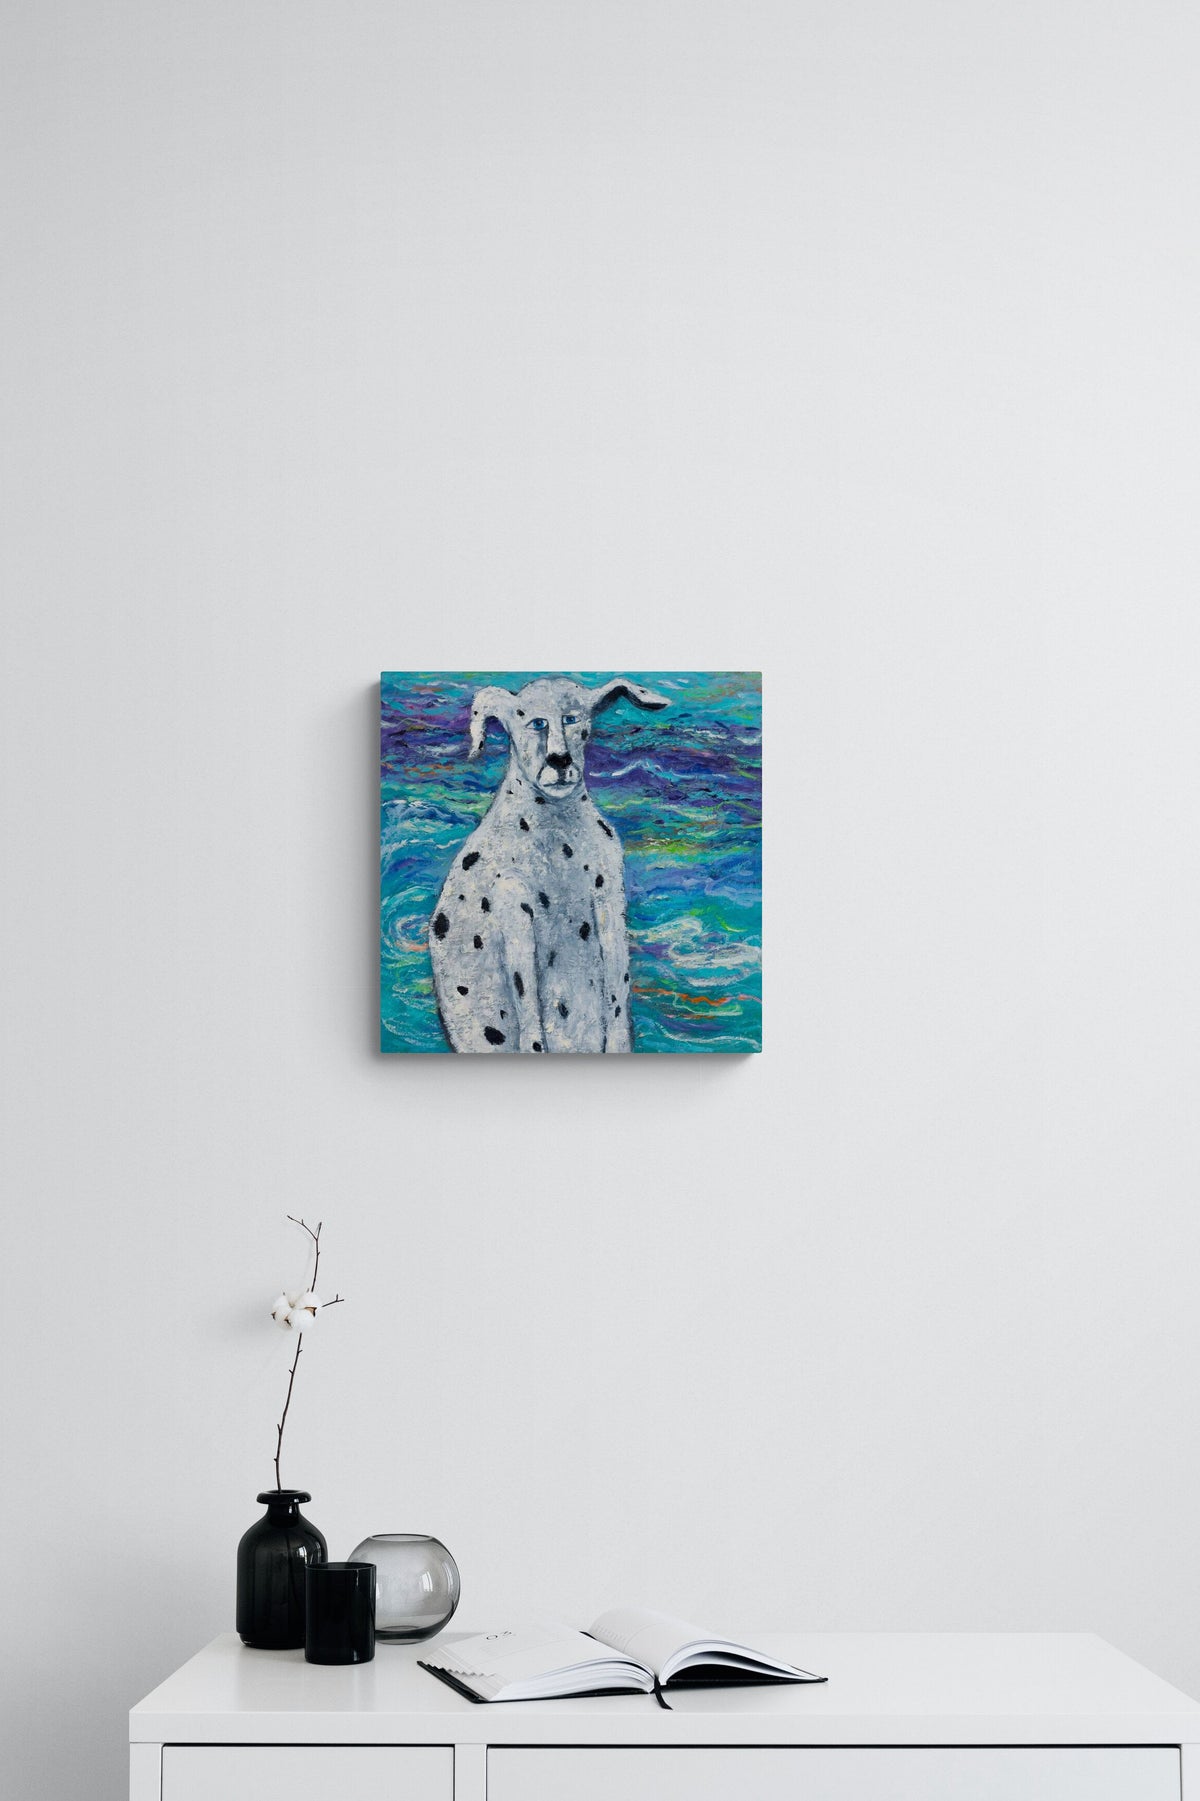 Impressionistic Dog painting gives life, emotion and blue colors to this desk area